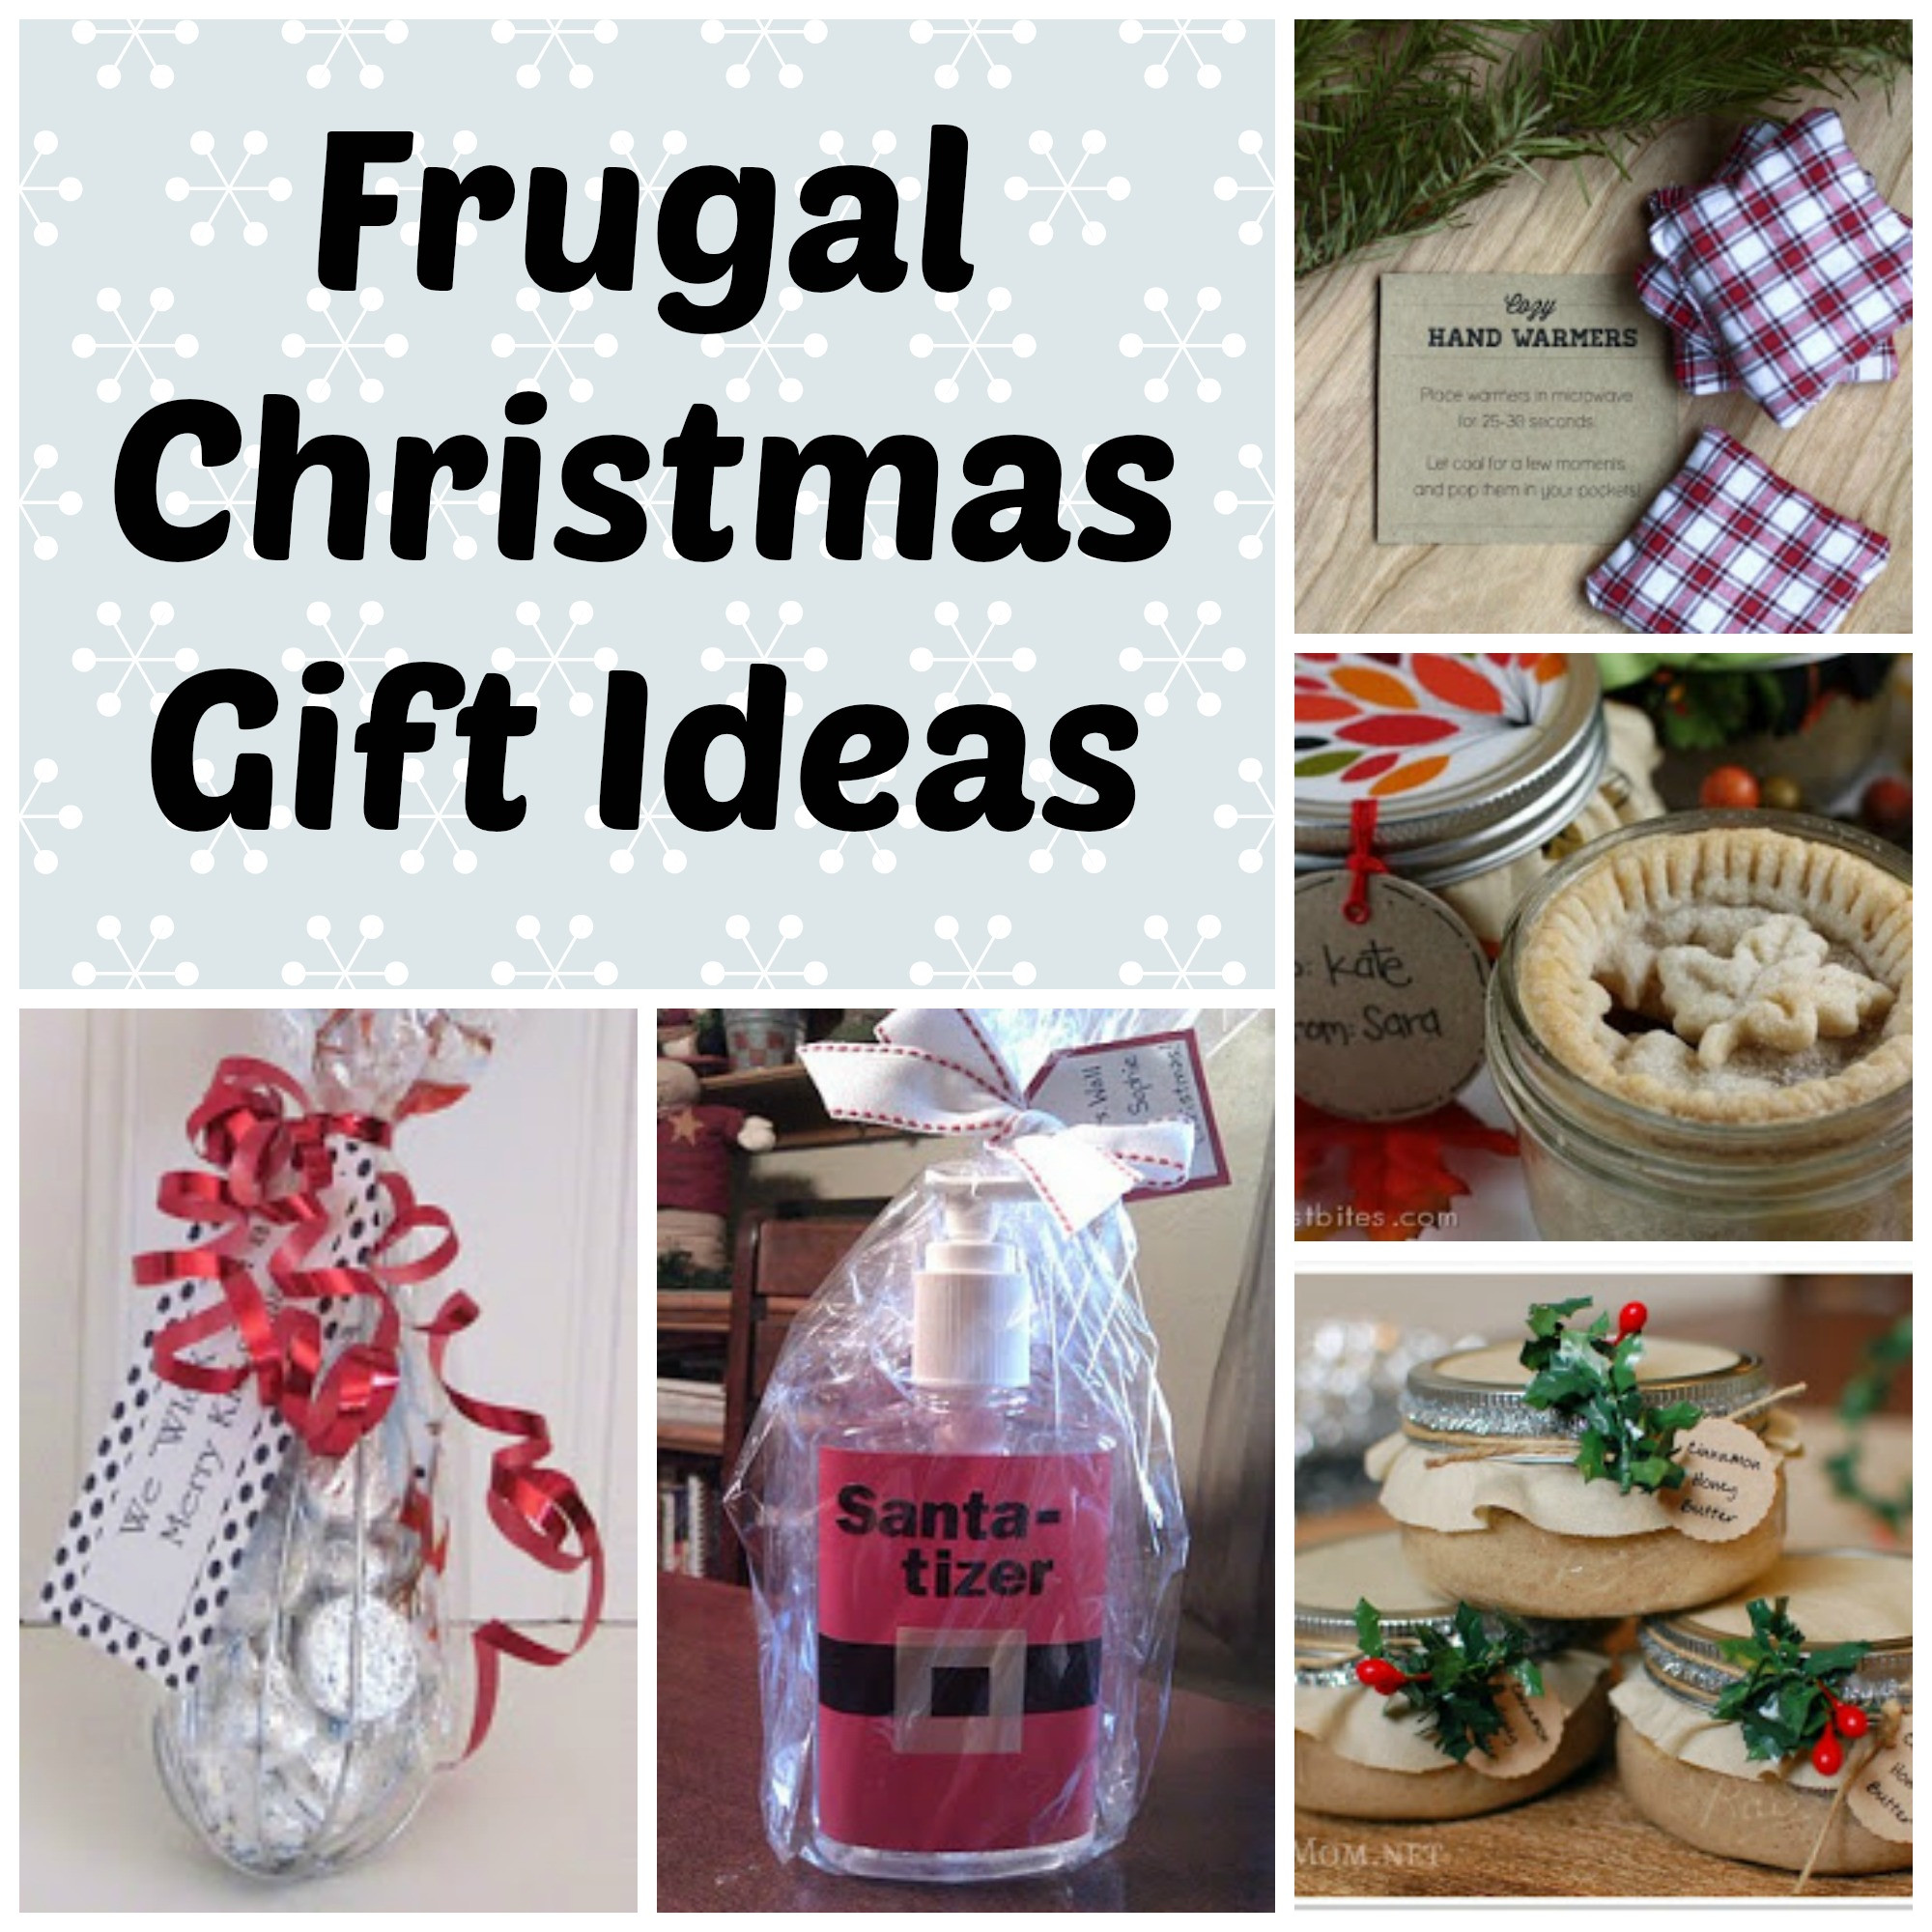 Christmas Gift Ideas On A Budget
 Frugal Christmas Gift Ideas Saving Cent by Cent